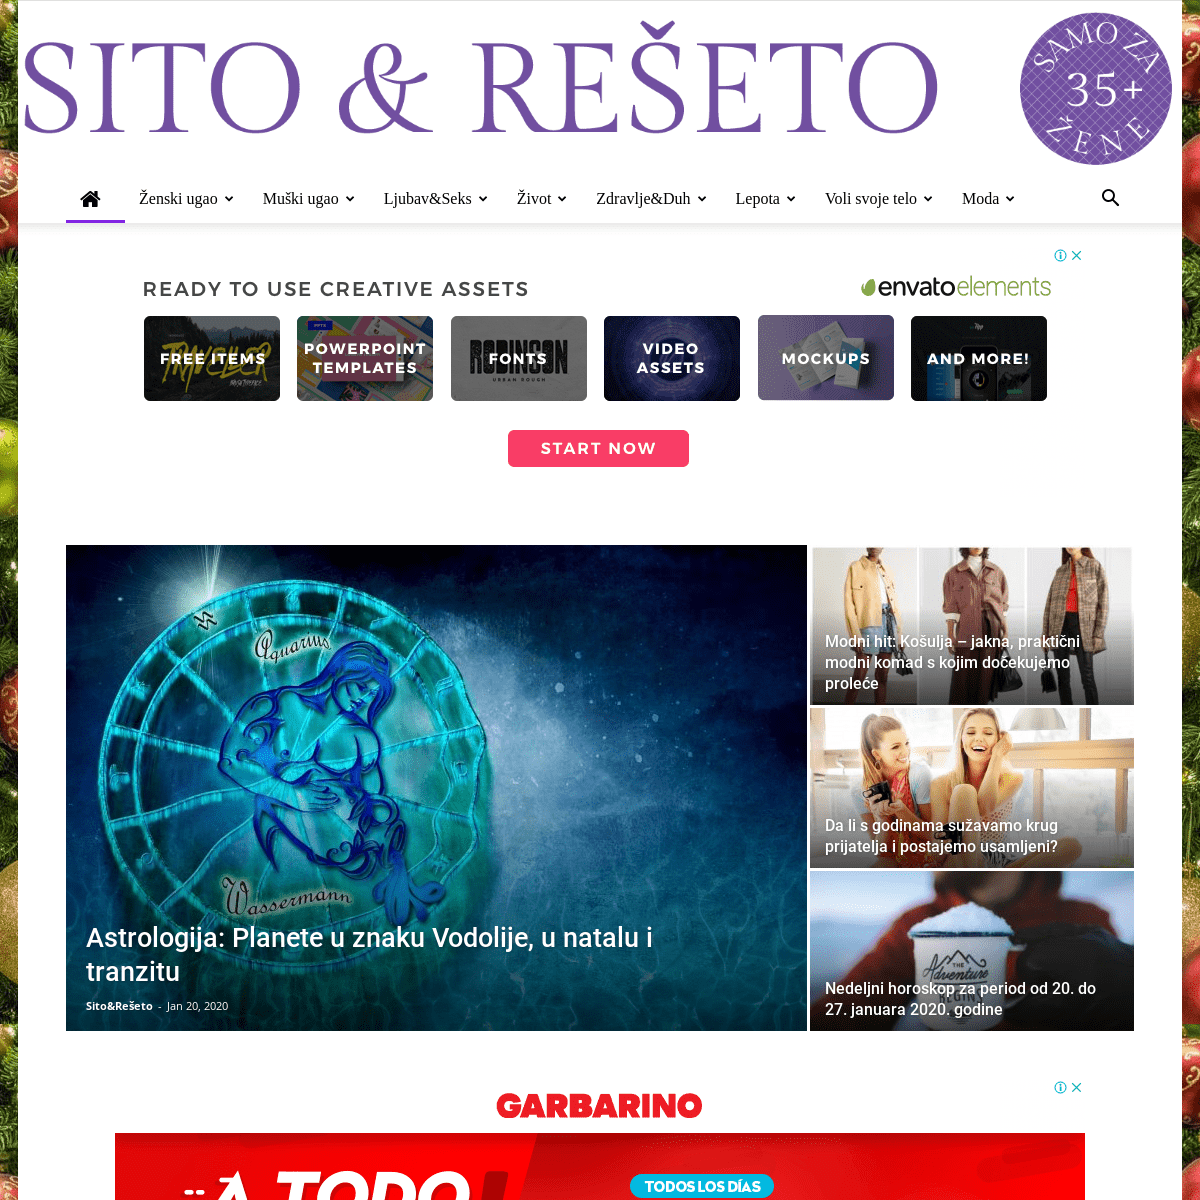 A complete backup of sitoireseto.com